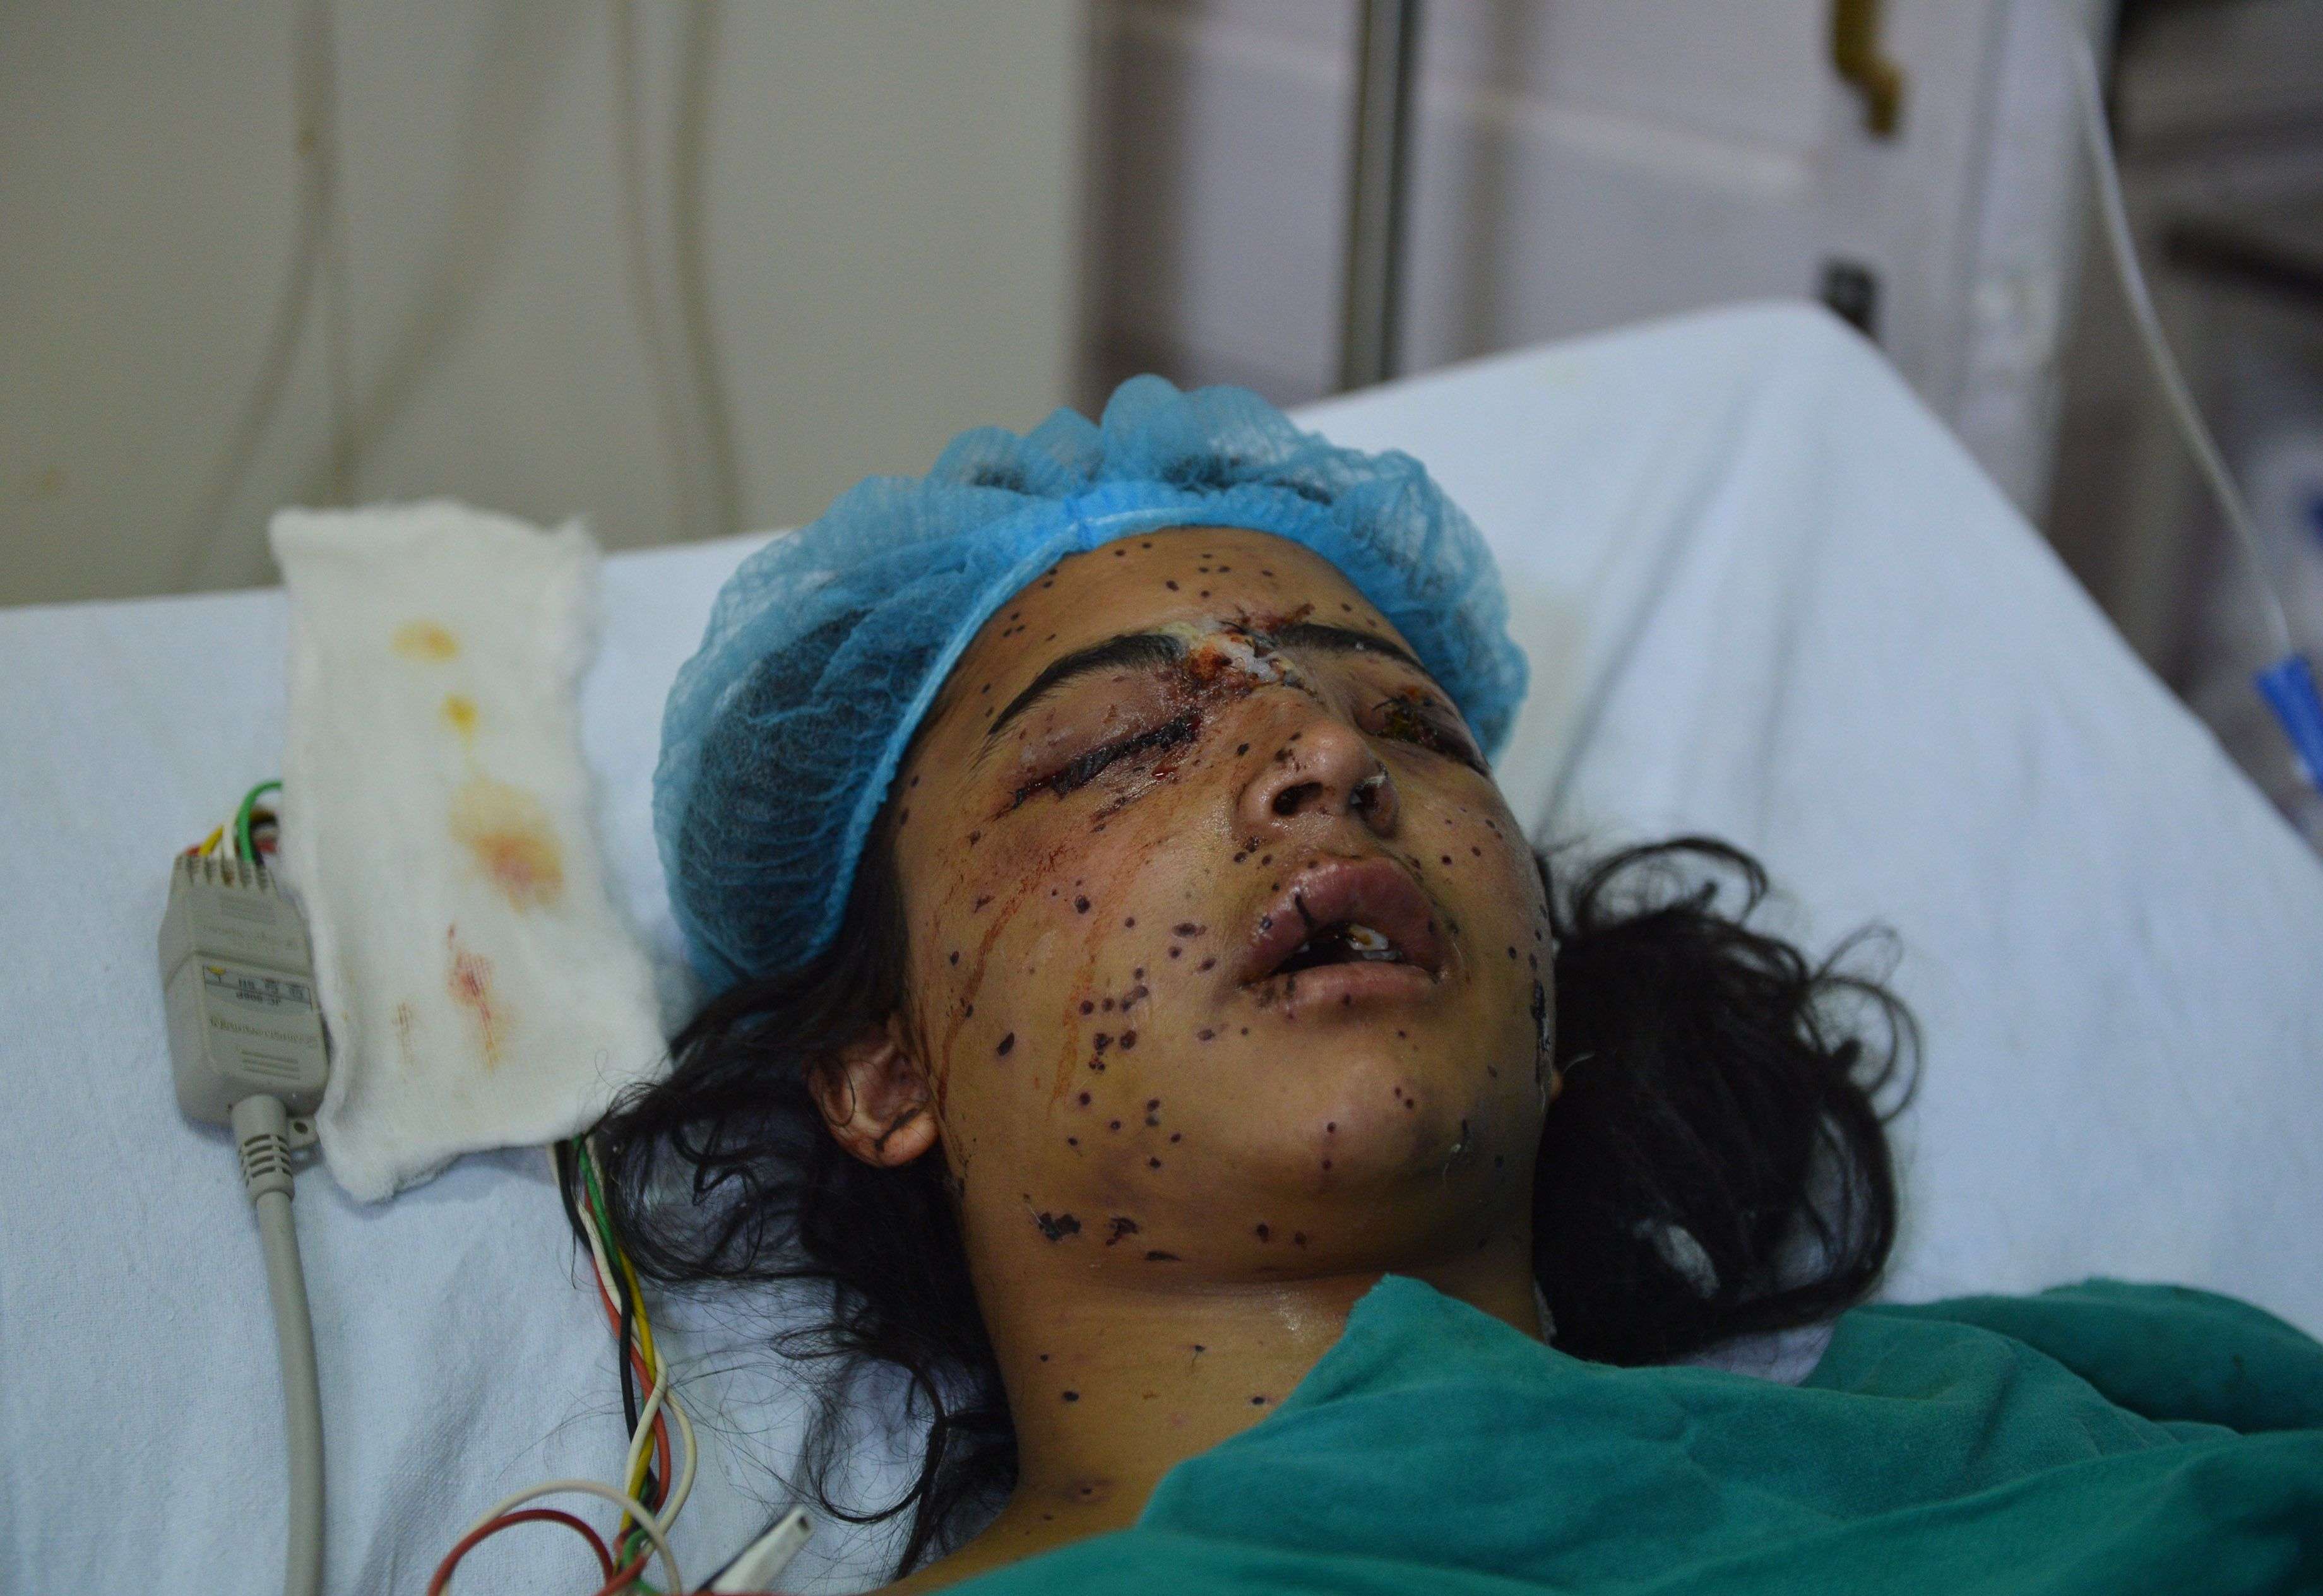 EDITORS NOTE: Graphic content / Kashmiri girl Insha Malik, 14, lays in a hospital bed after being shot with pellets fired by Indian security forces, with doctors saying she had lost vision in both eyes, in the surgical ICU hospital in Srinagar, in India-administered Kashmir on July 16, 2016. According to relatives, Insha was on the first floor of her home when forces fired pellet guns into the building on July 12. She was rushed to the hospital and joined hundreds of injured Kashmiris who have reported devastating eye injuries caused by "non-lethal" pellet gun firings. The death of popular rebel leader Burhan Wani in a gunfight with government forces last week sparked clashes in which more than 3,000 people, including about 200 police officers, have been injured. It is the worst civilian violence to hit the region since 2010, when mass protests broke out and left 120 dead. Hospitals in the main city of Srinagar have struggled to cope with the rush of wounded, hundreds of them with severe injuries in their eyes.  / AFP PHOTO / TAUSEEF MUSTAFA